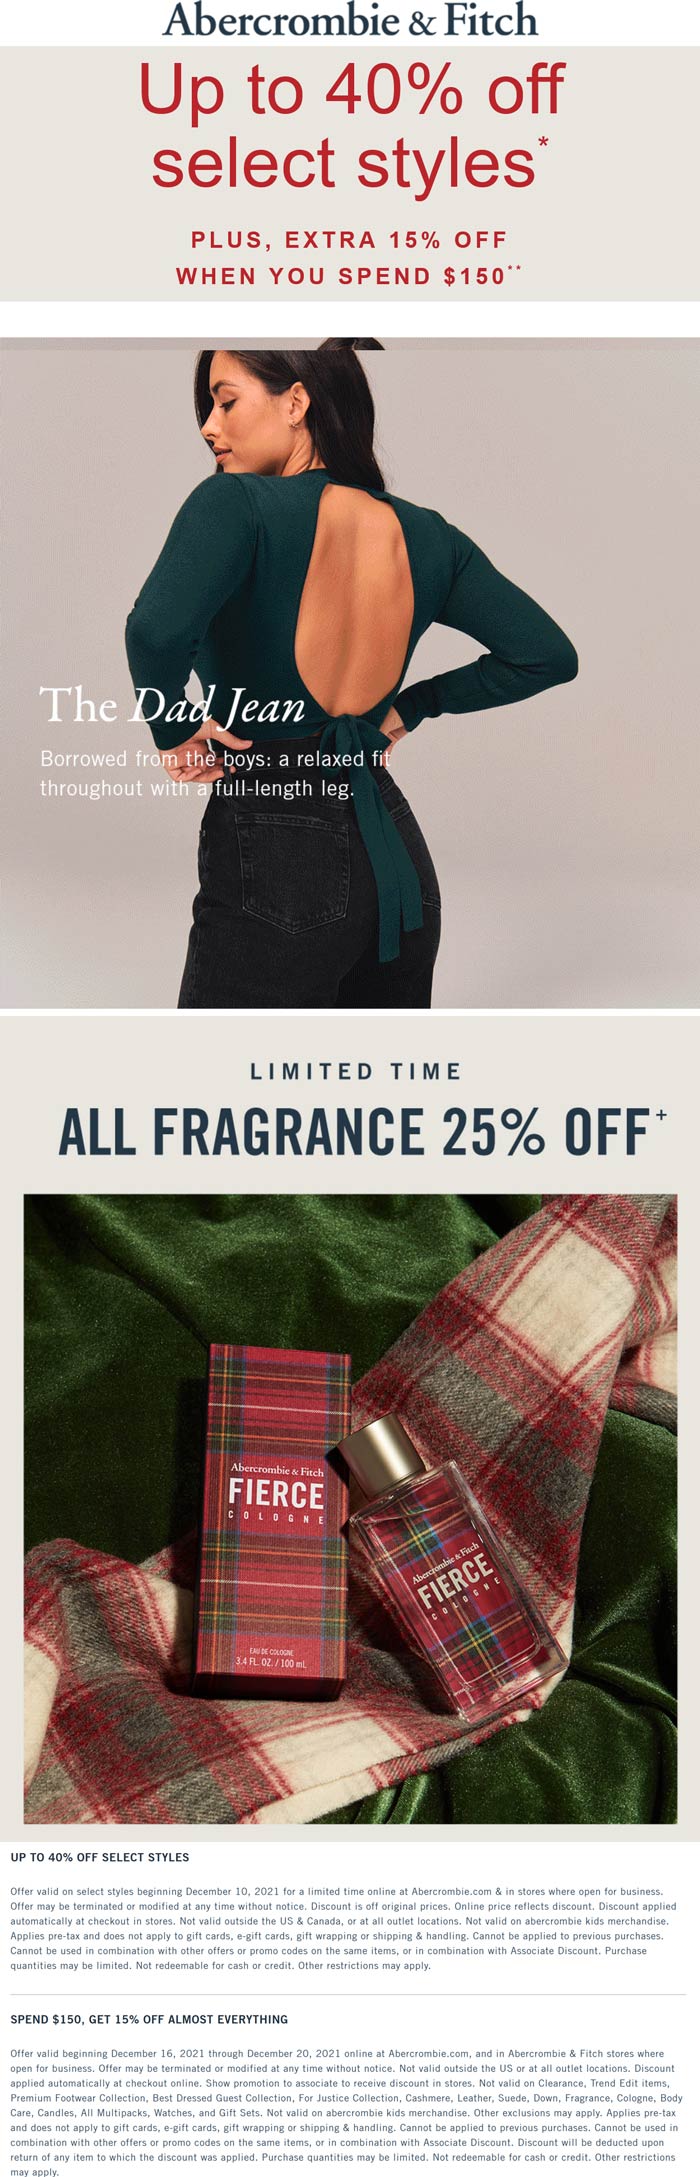 Abercrombie & Fitch stores Coupon  25% off fragrance & 40-55% off at Abercrombie & Fitch #abercrombiefitch 